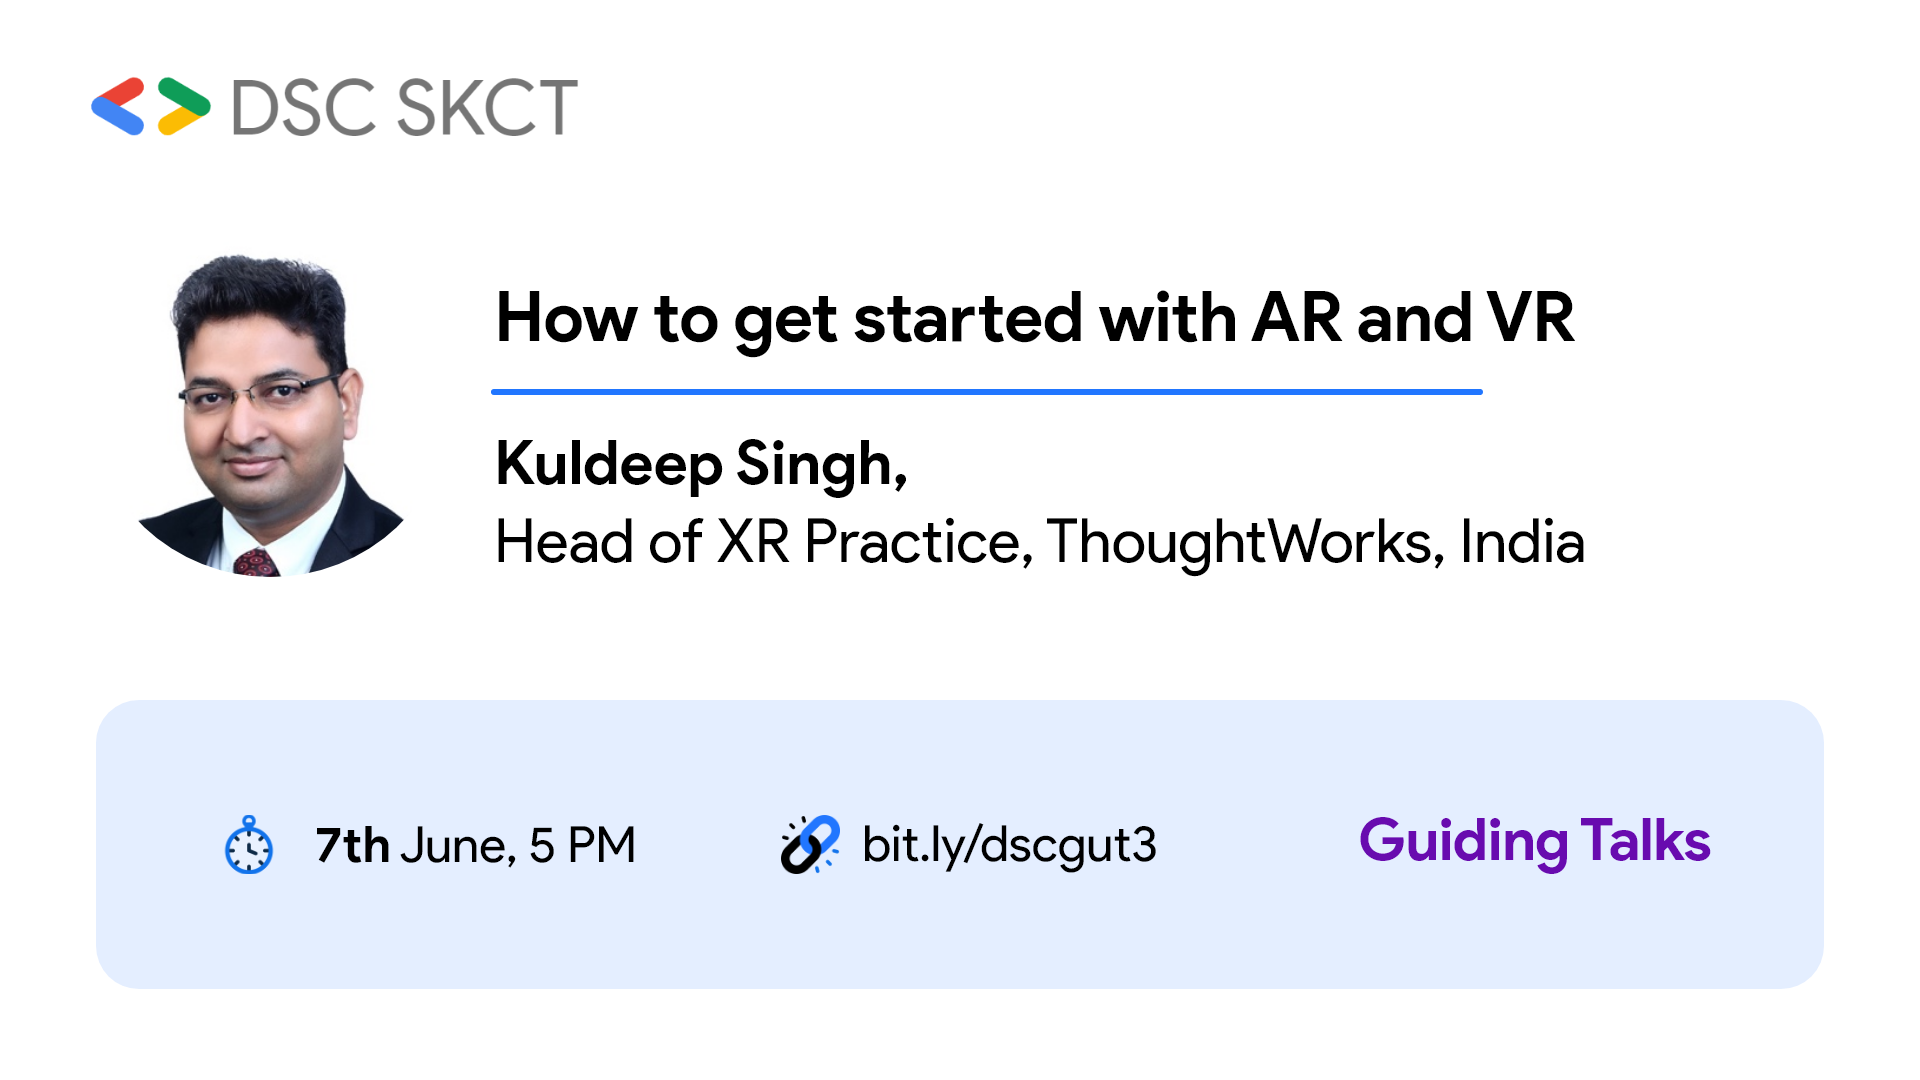 image from Speaker - Google DSC - How to get started with AR VR?